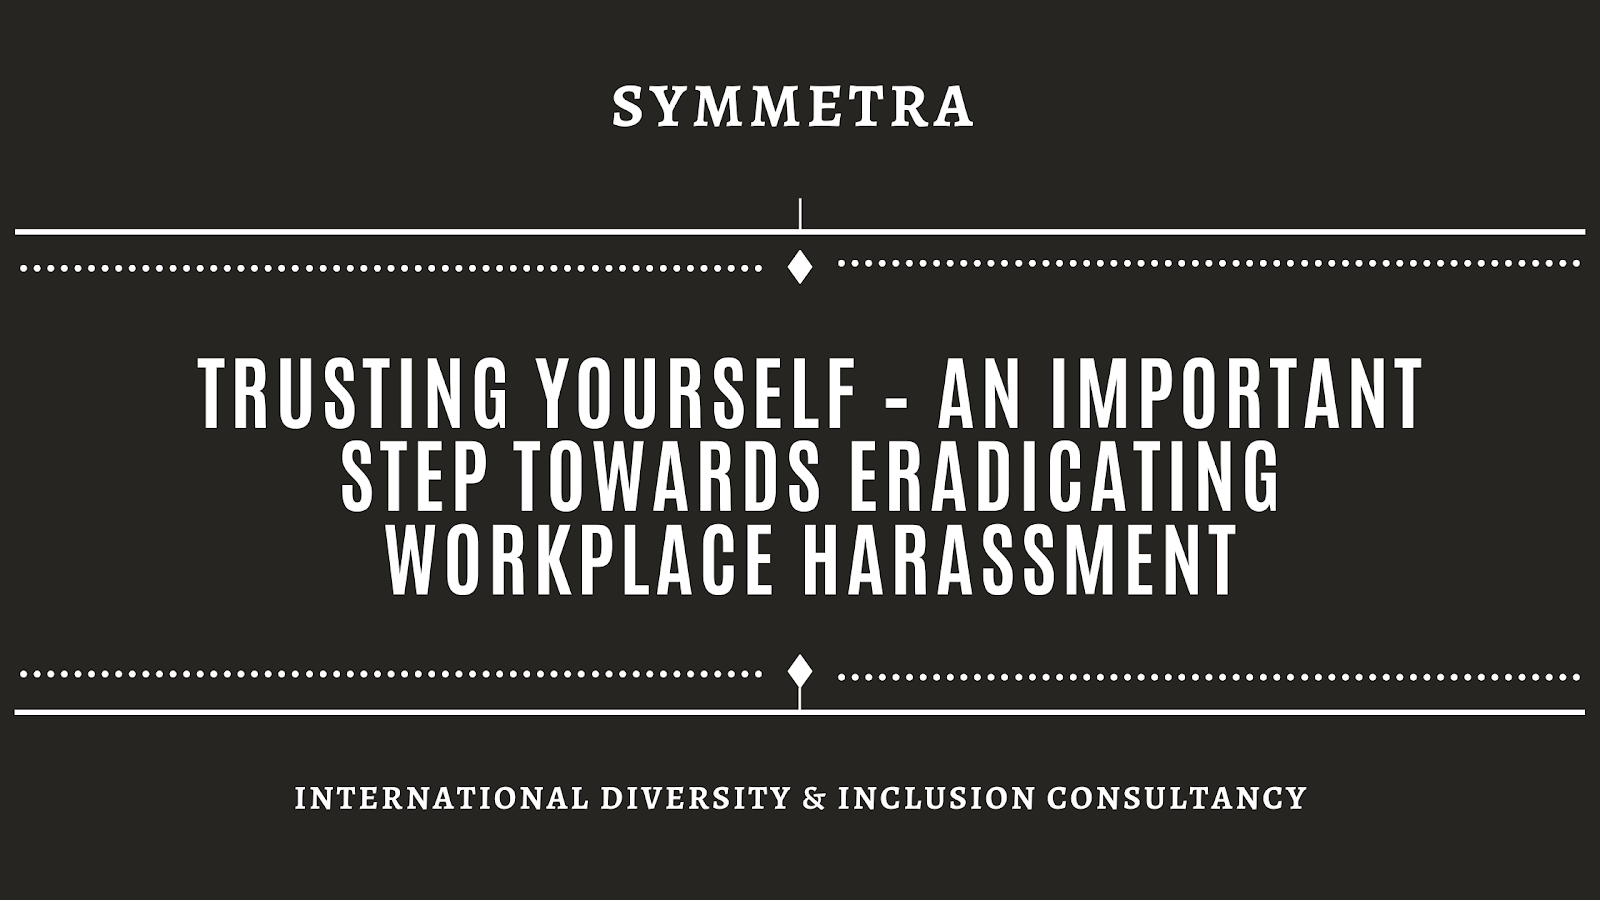 An Important Step Towards Eradicating Workplace Harassment